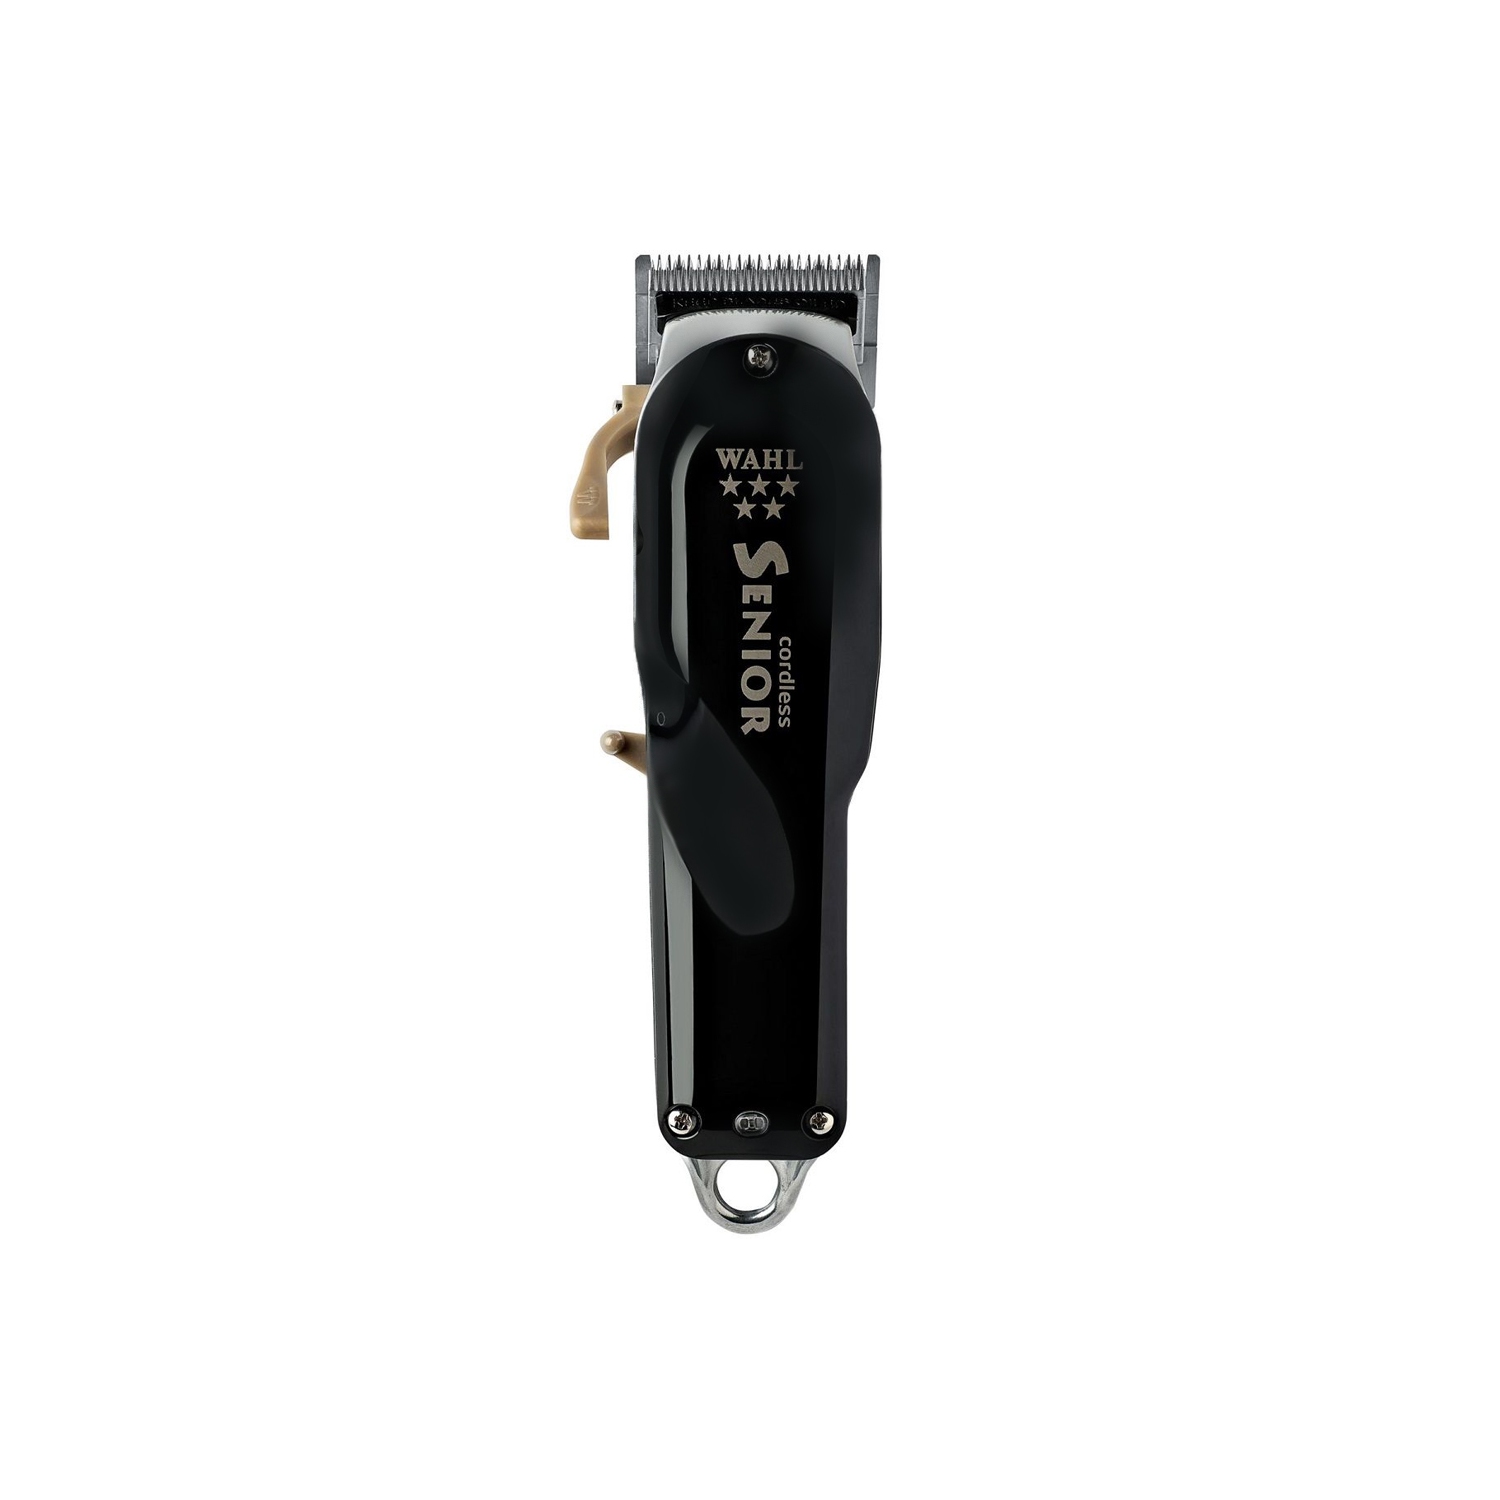 Wahl Professional 5-Star Senior Cordless Hair Clipper #WA56416 - Easy Haircuts with Long 70+ Minute Run Time for Professional Barbers and Stylists